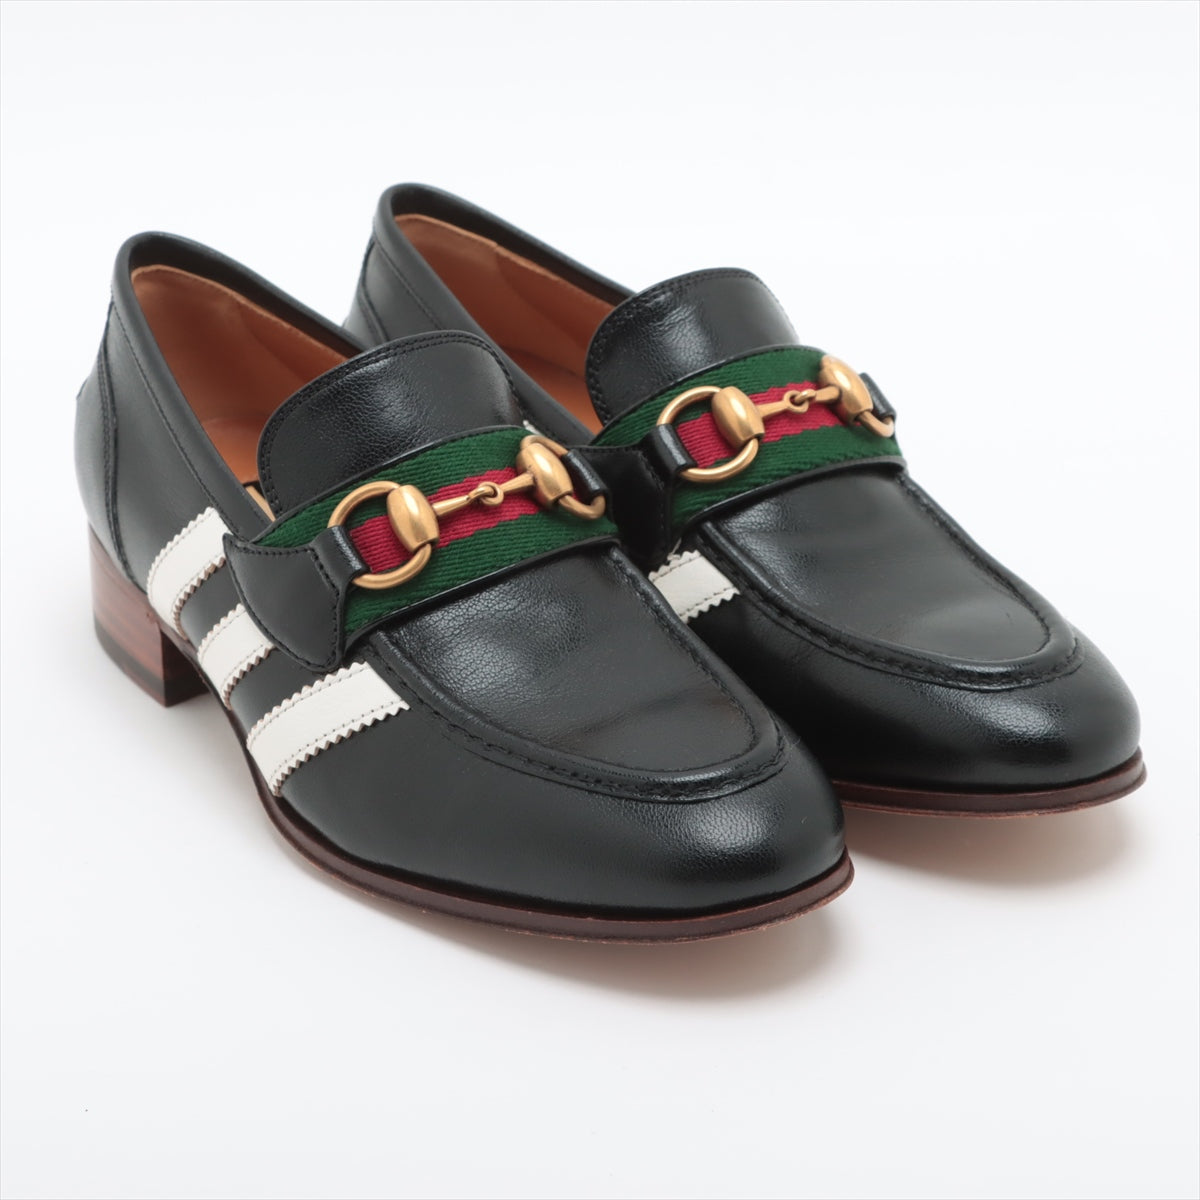 Gucci x adidas Horsebit Leather Loafer EU35 1/2 Ladies' Black 702284 Sherry Line box There is a bag